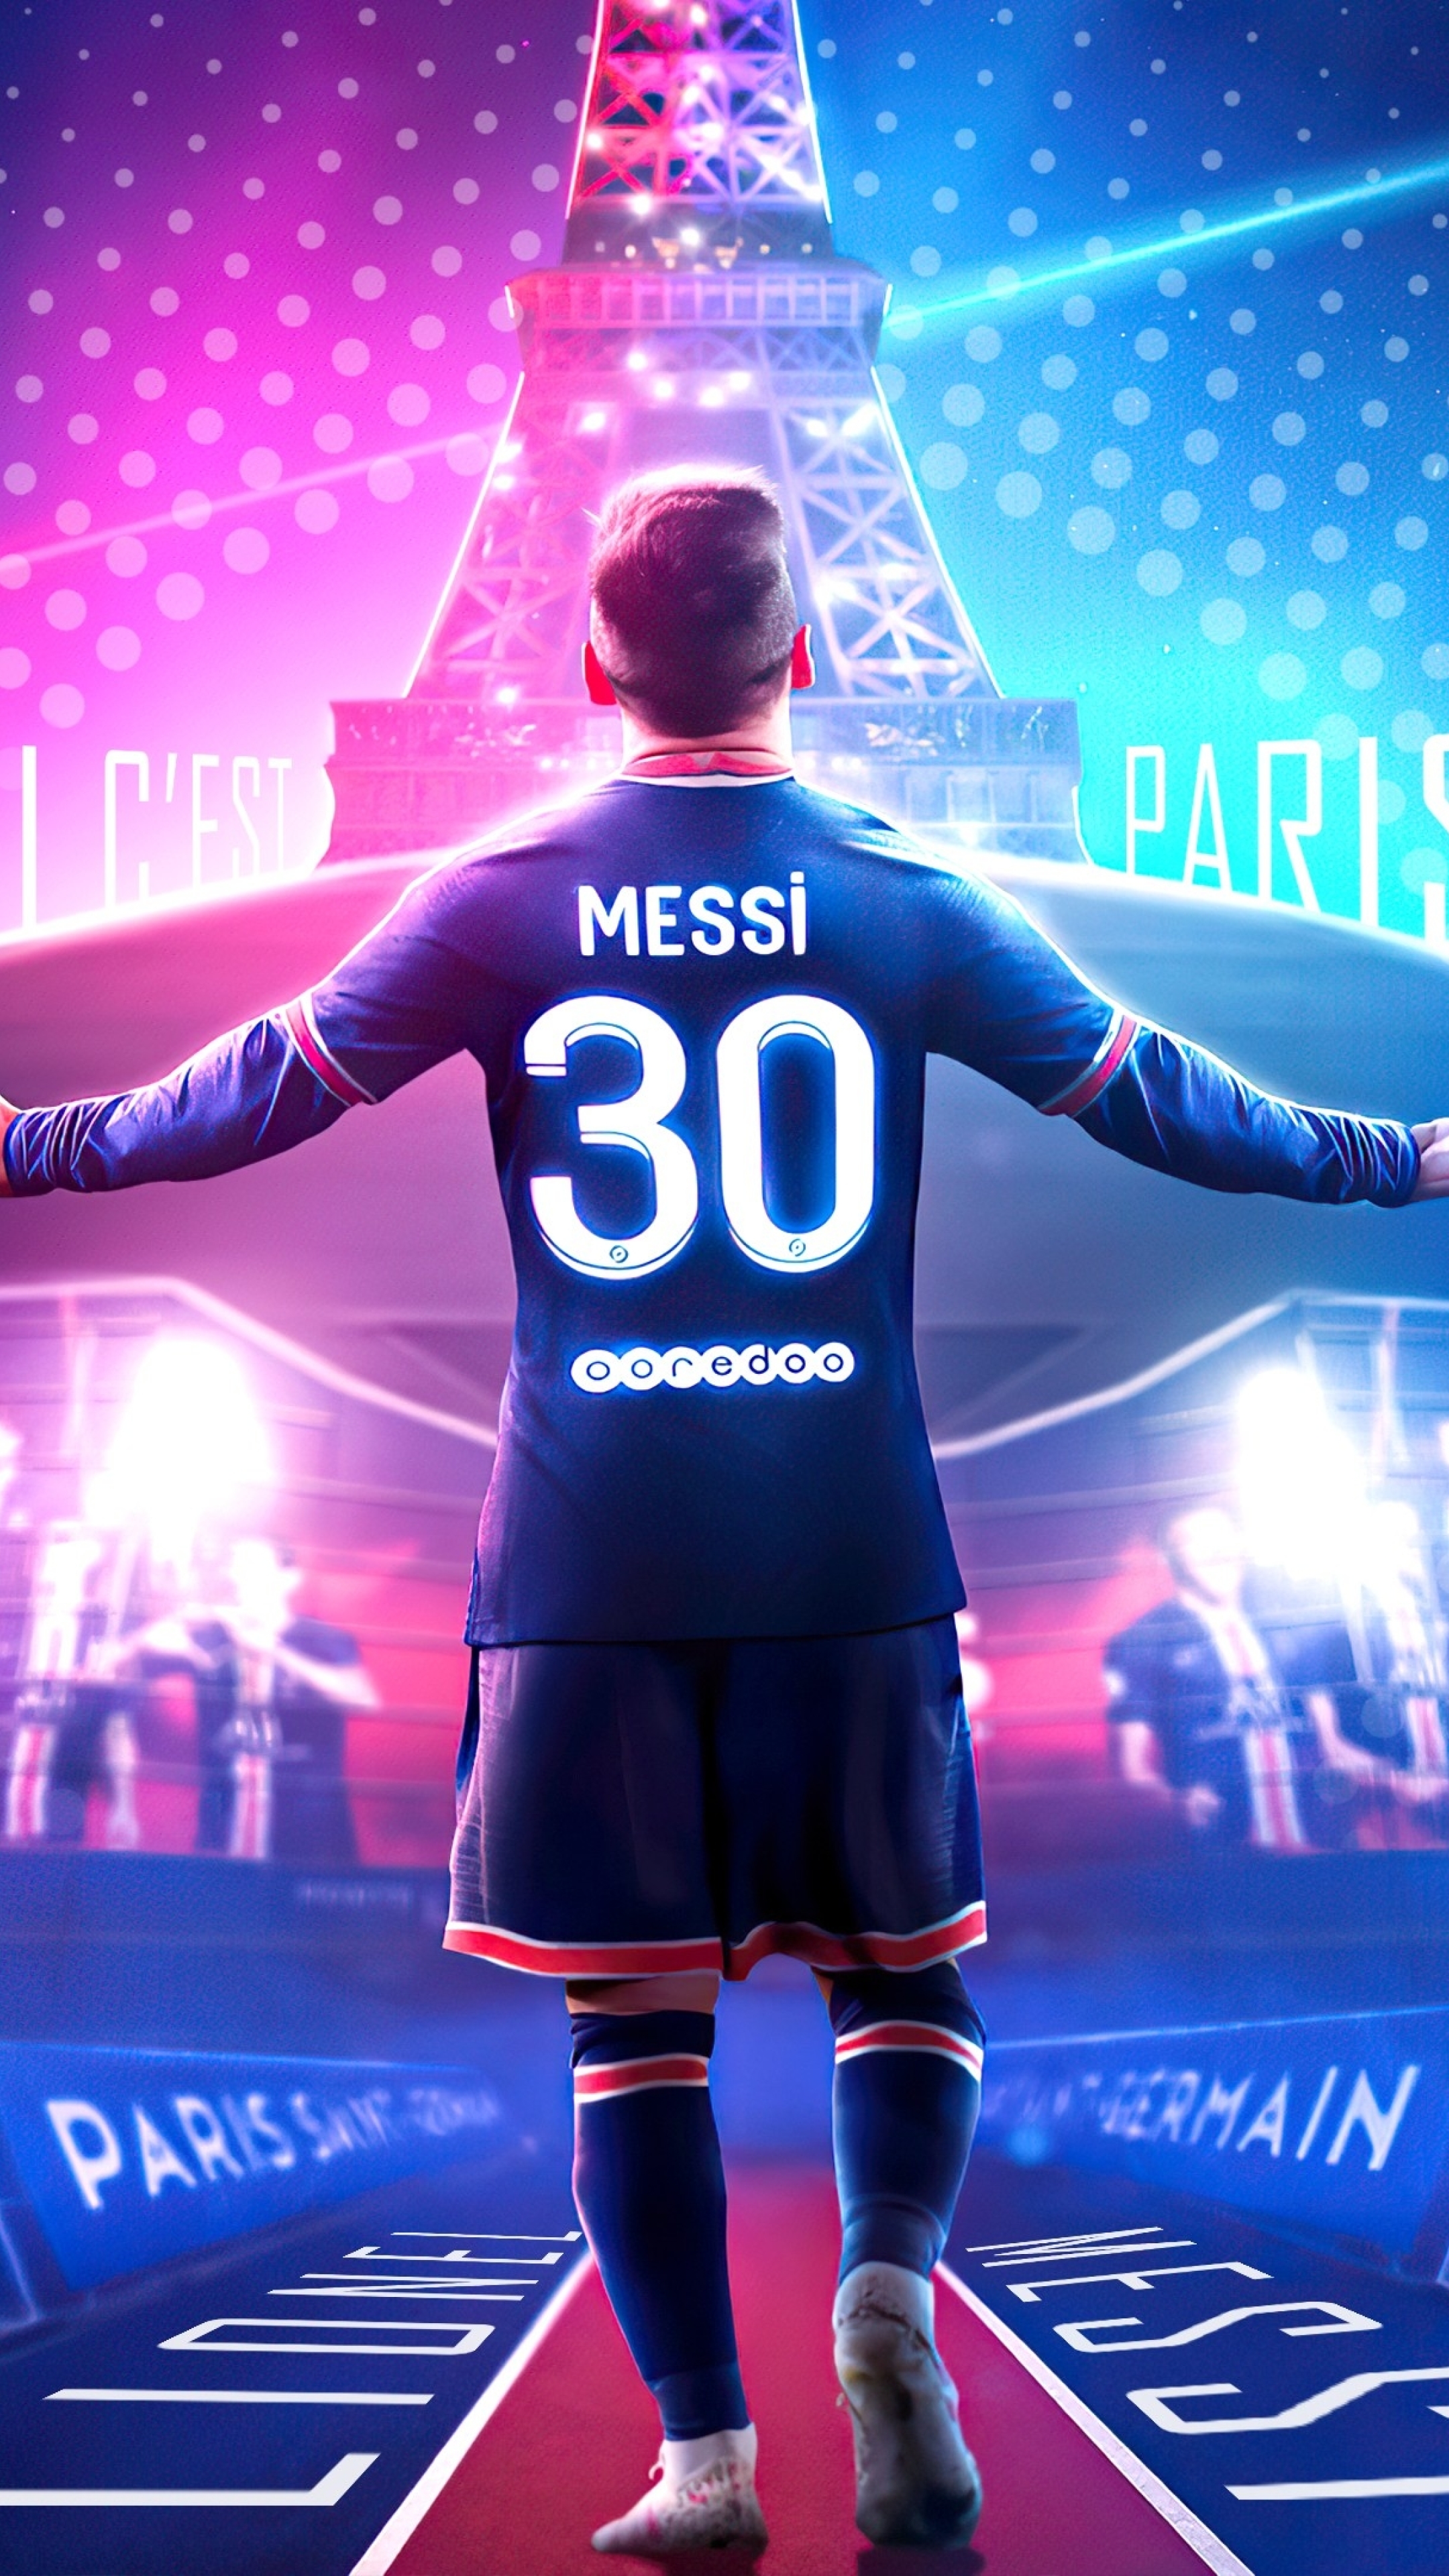 Lionel Messi Psg wallpaper by MPhonzy  Download on ZEDGE  0383